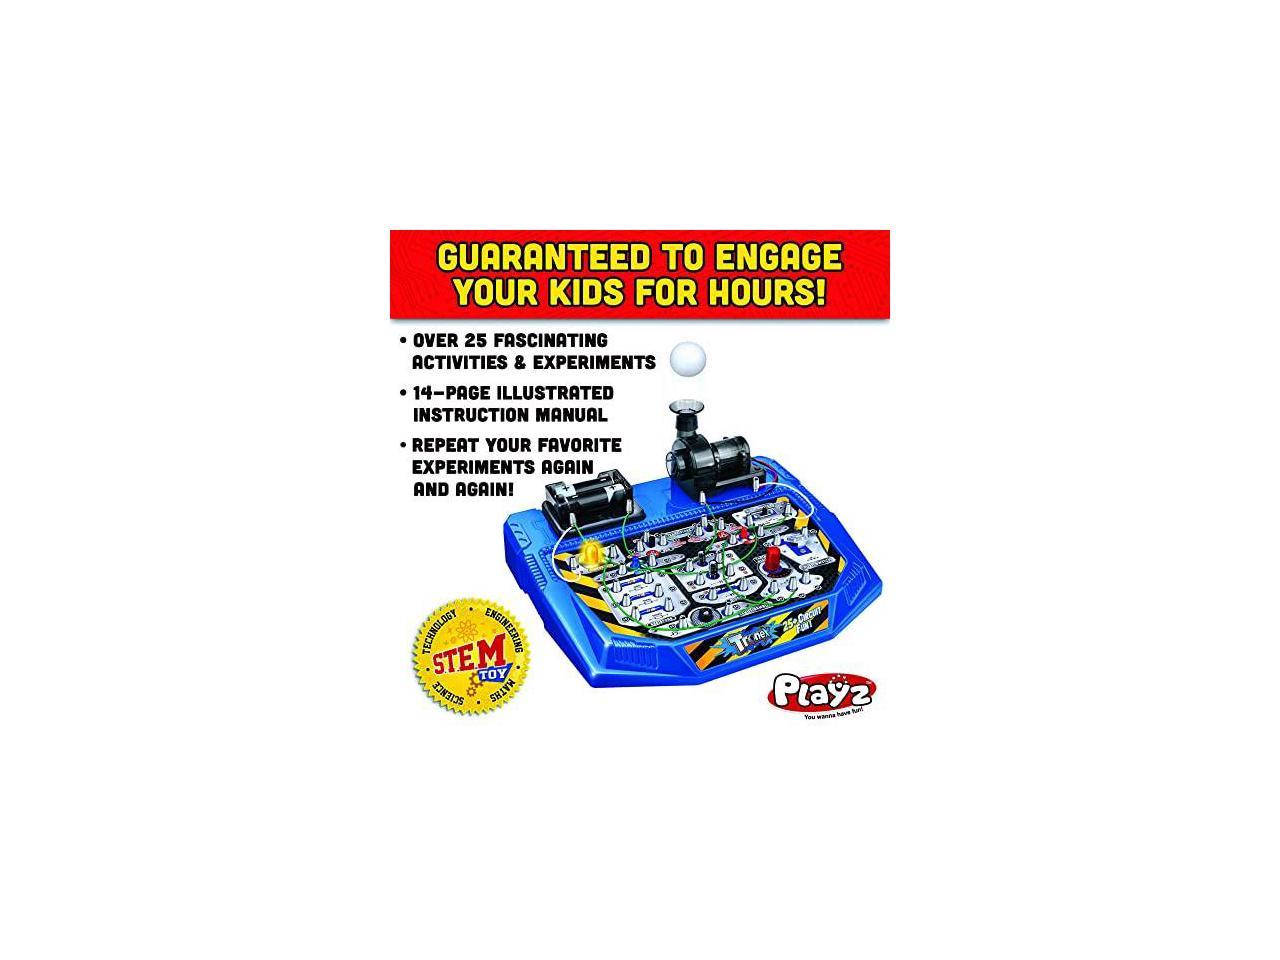 Electrical Circuit Board Engineering Kit For Kids W/ 25 STEM Learning Projects 